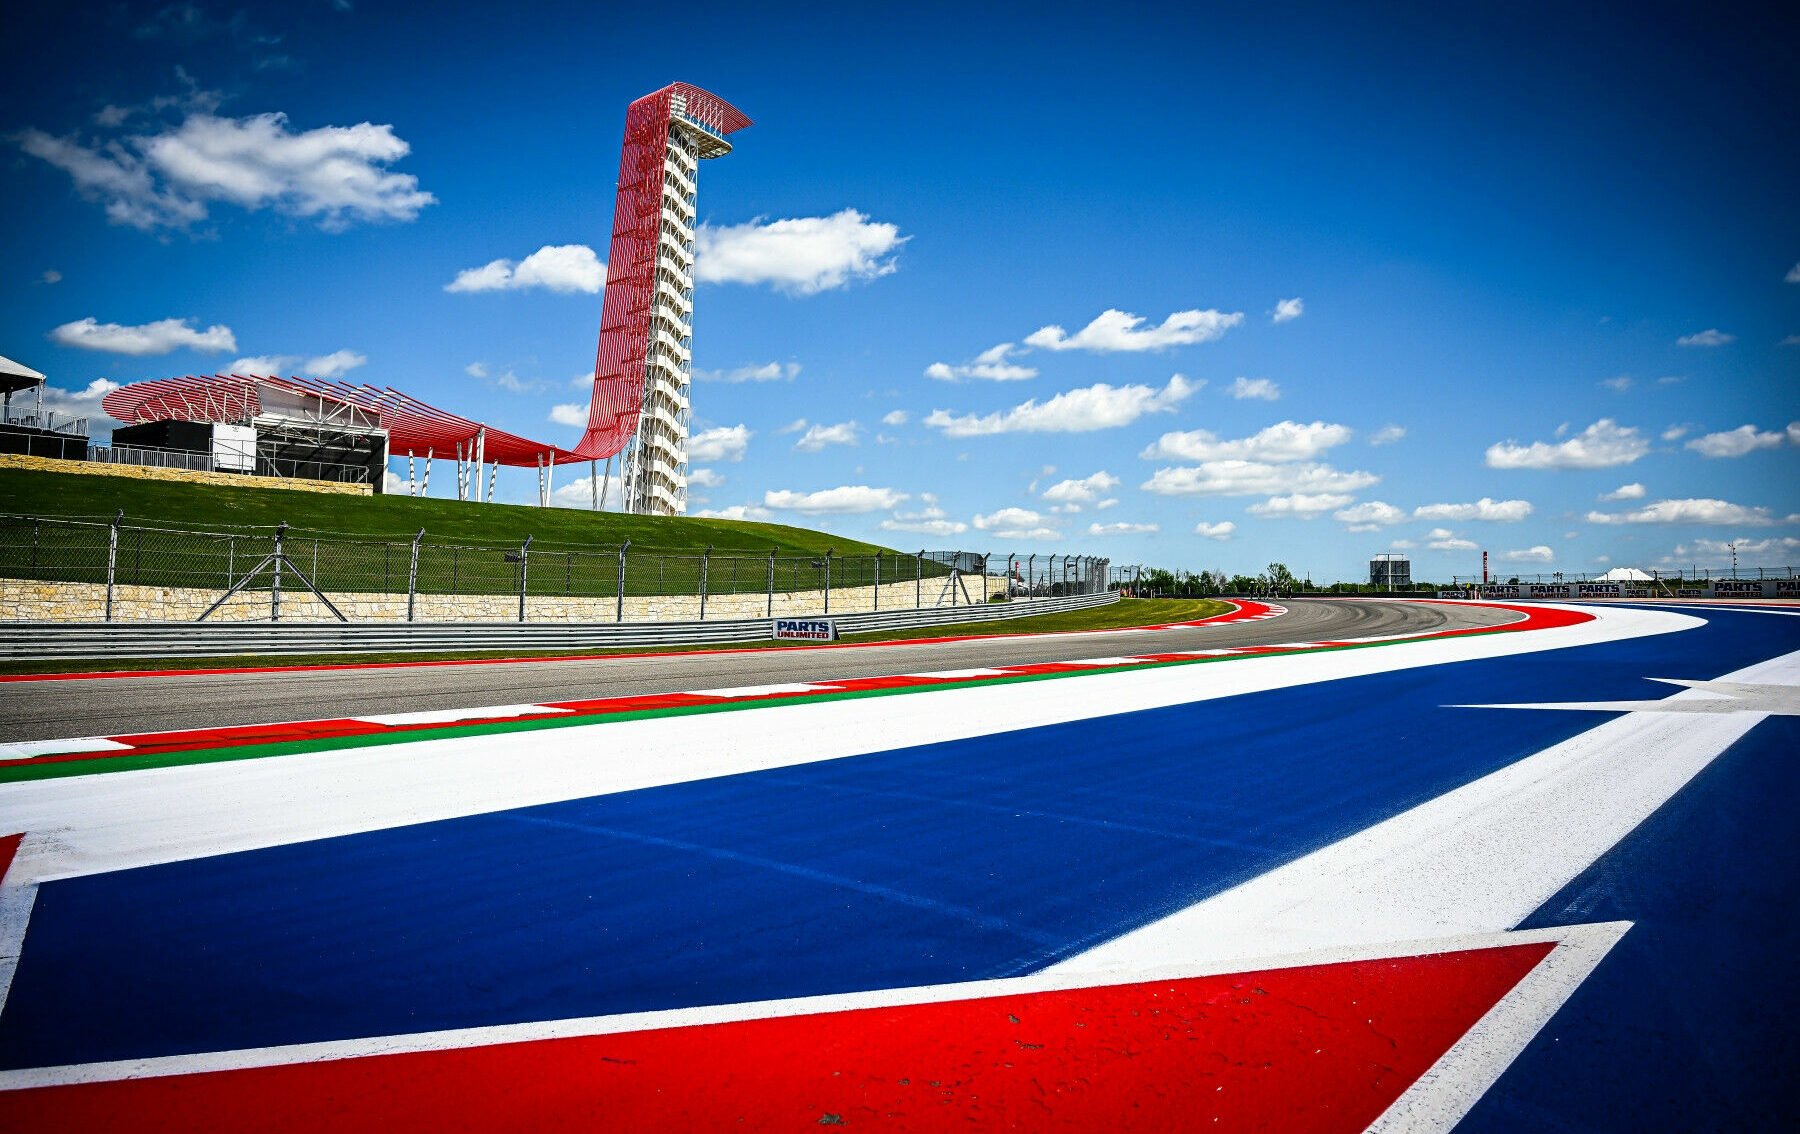 Moto2 World Championship: Circuit Of The Americas Race Results Revealed by Roadracing World Magazine